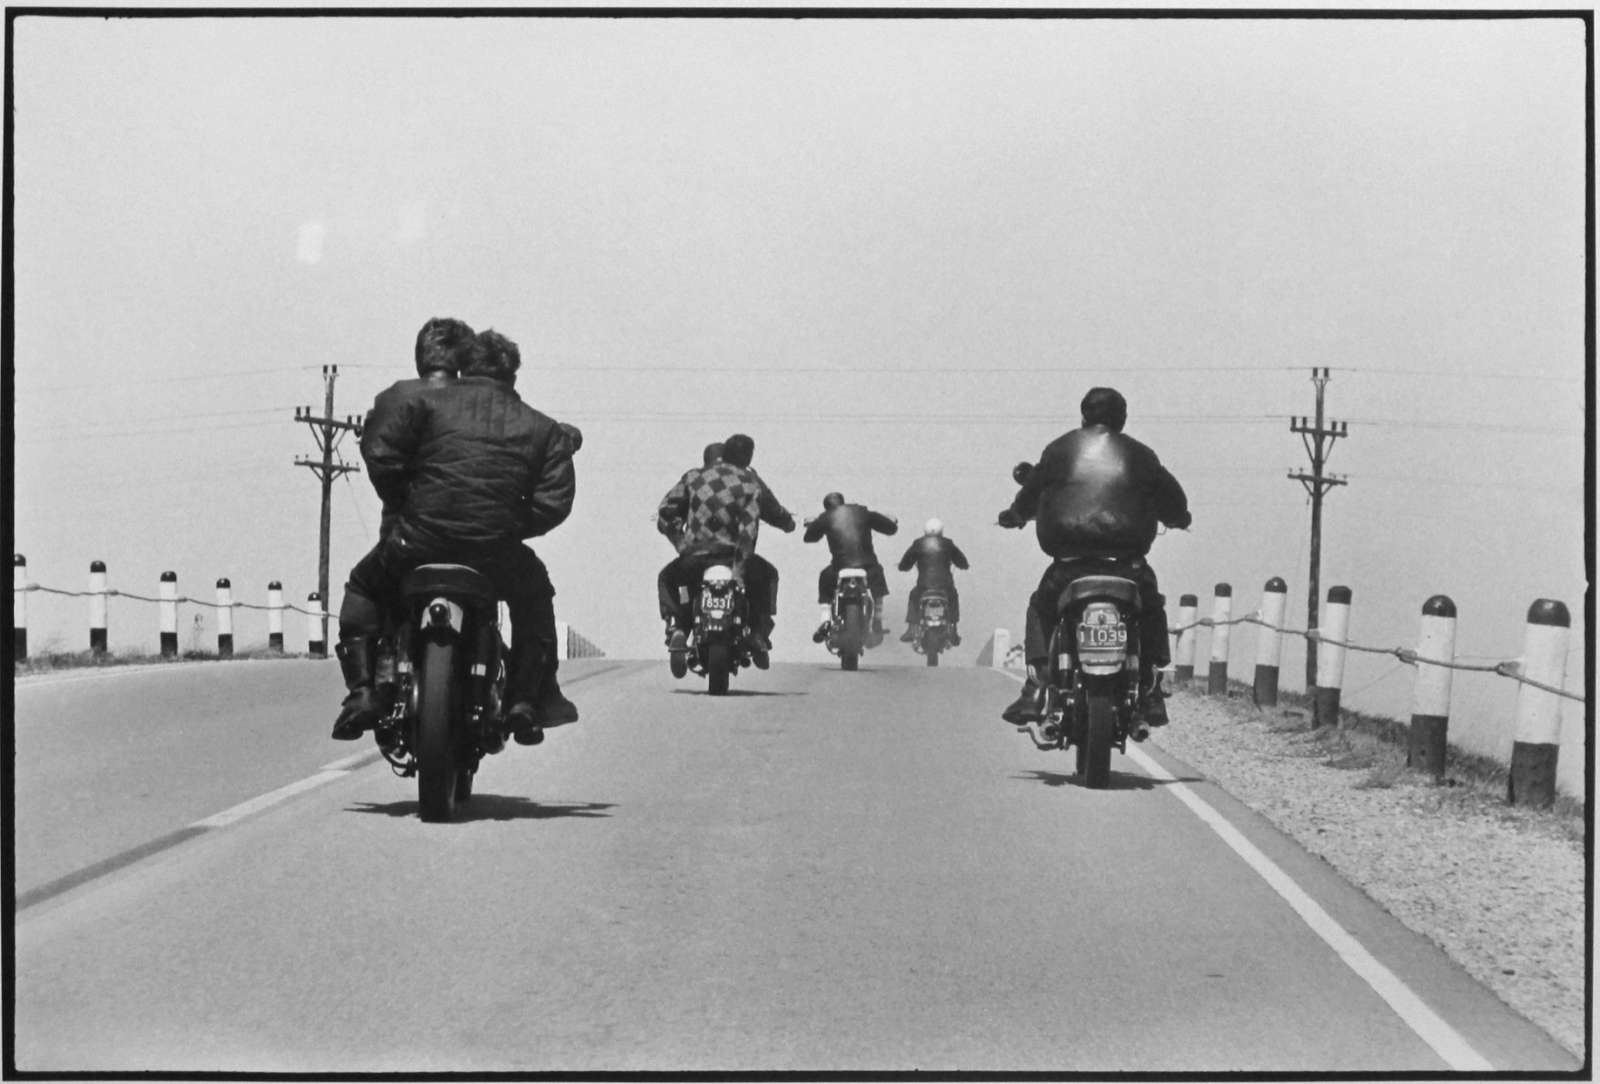 Danny Lyon on the Making of “The Bikeriders” Lyon’s riveting book about a Chicago motorcycle club is one of the definitive accounts of American counterculture—and the inspiration for a new film starring Austin Butler and Jodie Comer.